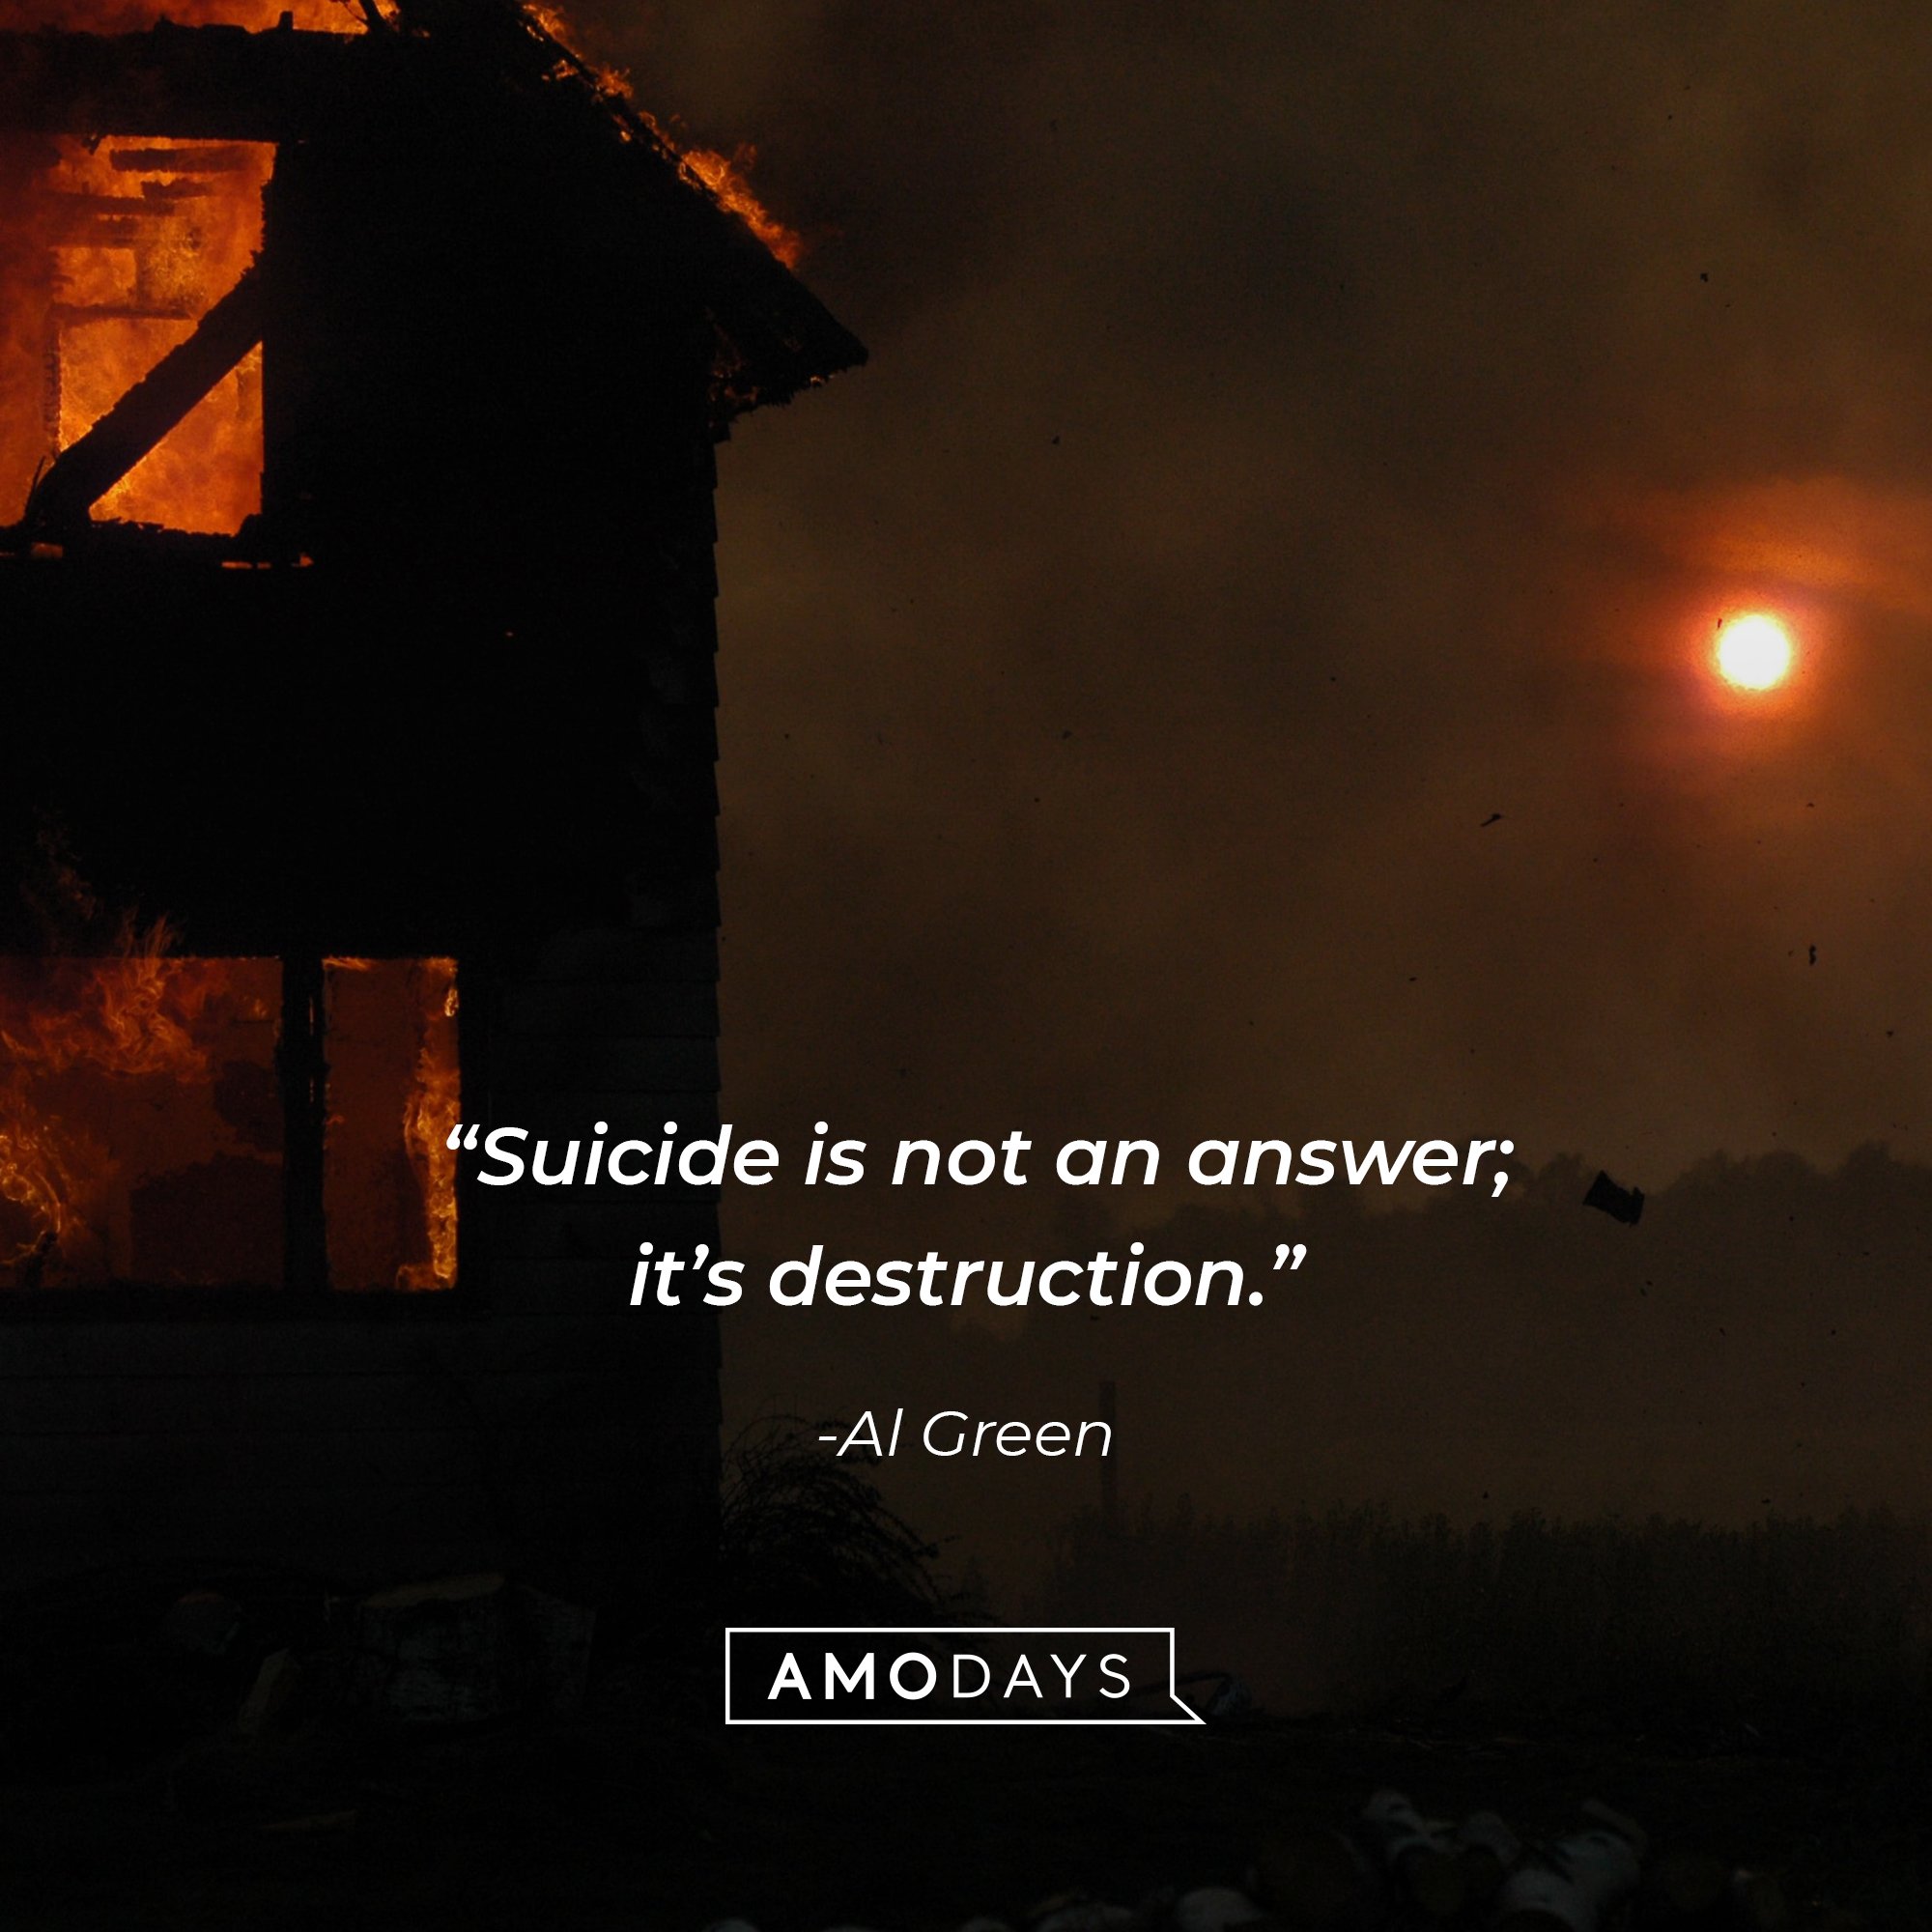  Al Green's quote: “Suicide is not an answer; it’s destruction.” | Image: AmoDays